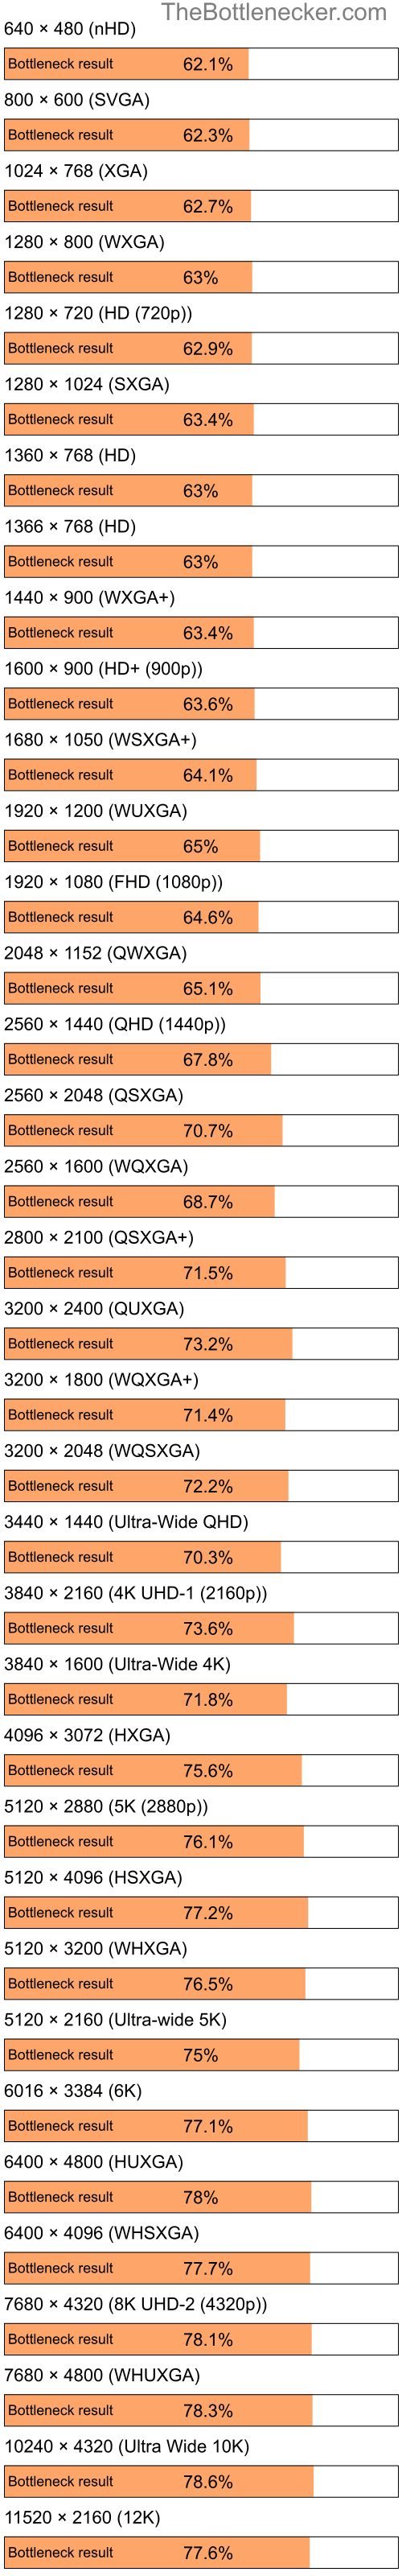 Bottleneck results by resolution for Intel Celeron and NVIDIA Quadro NVS 130M in General Tasks